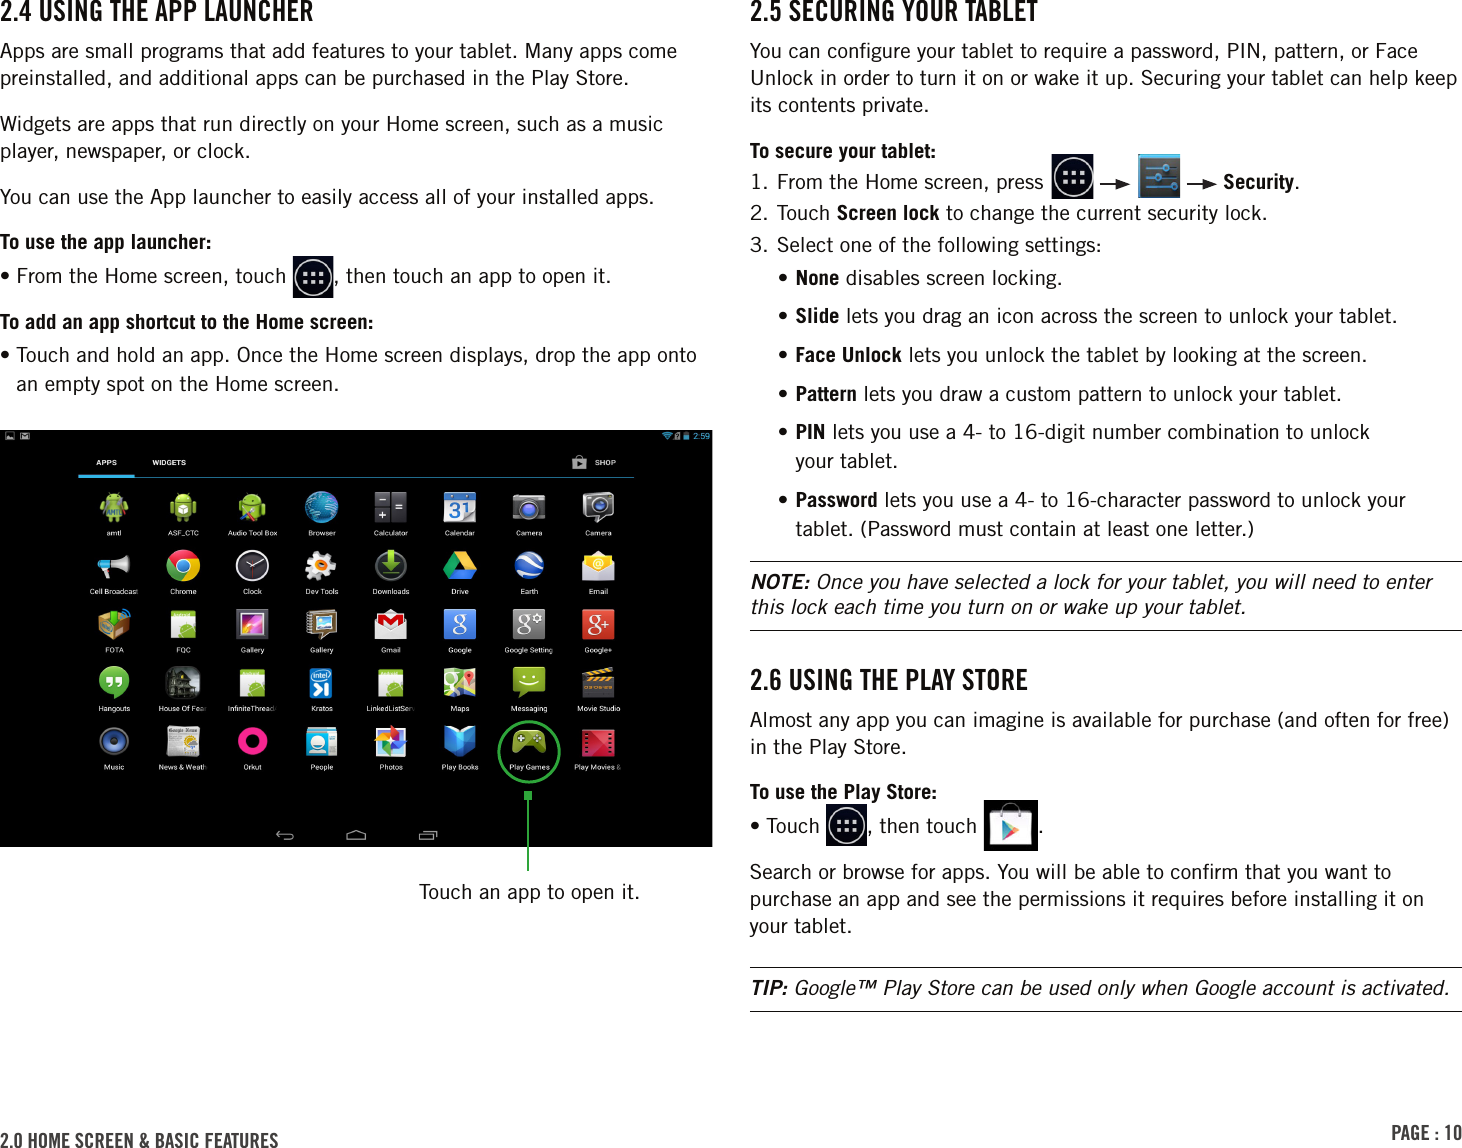 PAGE : 102.0 HOME SCREEN &amp; BASIC FEATURES 2.5 SECURING YOUR TABLETYou can conﬁgure your tablet to require a password, PIN, pattern, or Face Unlock in order to turn it on or wake it up. Securing your tablet can help keep its contents private.To secure your tablet:1.  From the Home screen, press         Security.2.  Touch  Screen lock to change the current security lock.3. Select one of the following settings:• None disables screen locking.• Slide lets you drag an icon across the screen to unlock your tablet.• Face Unlock lets you unlock the tablet by looking at the screen.• Pattern lets you draw a custom pattern to unlock your tablet.•  PIN lets you use a 4- to 16-digit number combination to unlock  your tablet.•  Password lets you use a 4- to 16-character password to unlock your tablet. (Password must contain at least one letter.)NOTE: Once you have selected a lock for your tablet, you will need to enter this lock each time you turn on or wake up your tablet.2.6 USING THE PLAY STOREAlmost any app you can imagine is available for purchase (and often for free) in the Play Store.To use the Play Store:• Touch  , then touch  .Search or browse for apps. You will be able to conﬁrm that you want to purchase an app and see the permissions it requires before installing it on your tablet.TIP: Google™ Play Store can be used only when Google account is activated.2.4 USING THE APP LAUNCHERApps are small programs that add features to your tablet. Many apps come preinstalled, and additional apps can be purchased in the Play Store.Widgets are apps that run directly on your Home screen, such as a music player, newspaper, or clock.You can use the App launcher to easily access all of your installed apps. To use the app launcher:• From the Home screen, touch  , then touch an app to open it.To add an app shortcut to the Home screen:•  Touch and hold an app. Once the Home screen displays, drop the app onto an empty spot on the Home screen.Touch an app to open it.